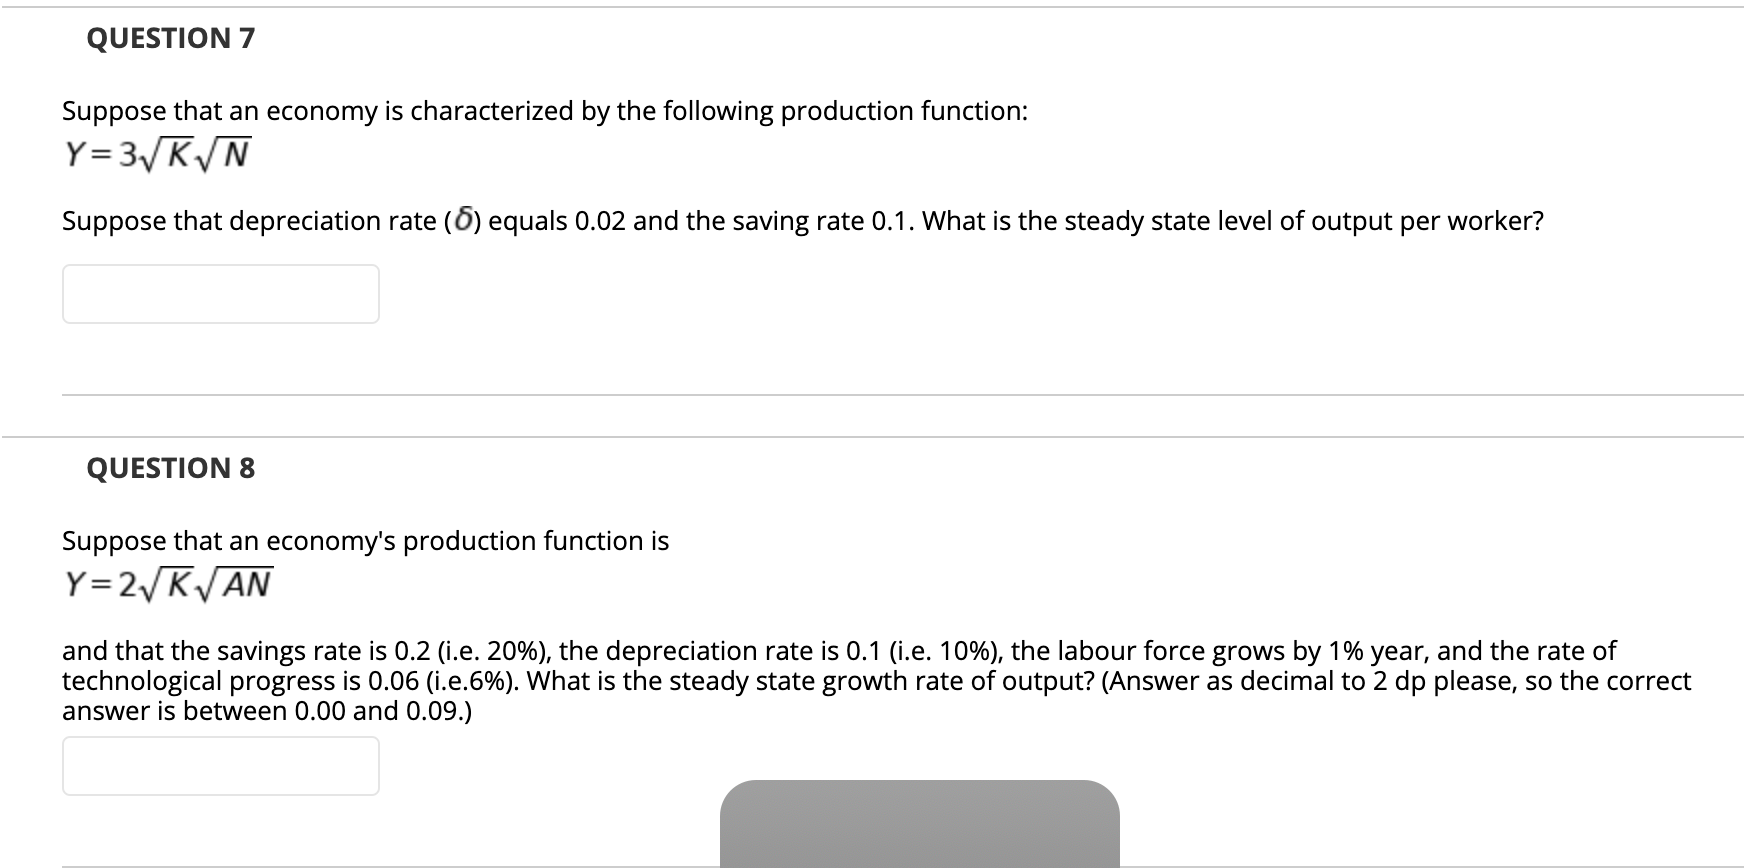 Suppose that an economy is characterized by the following production function:
Y=3 K/N
Suppose that depreciation rate (6) equals 0.02 and the saving rate 0.1. What is the steady state level of output per worker?
